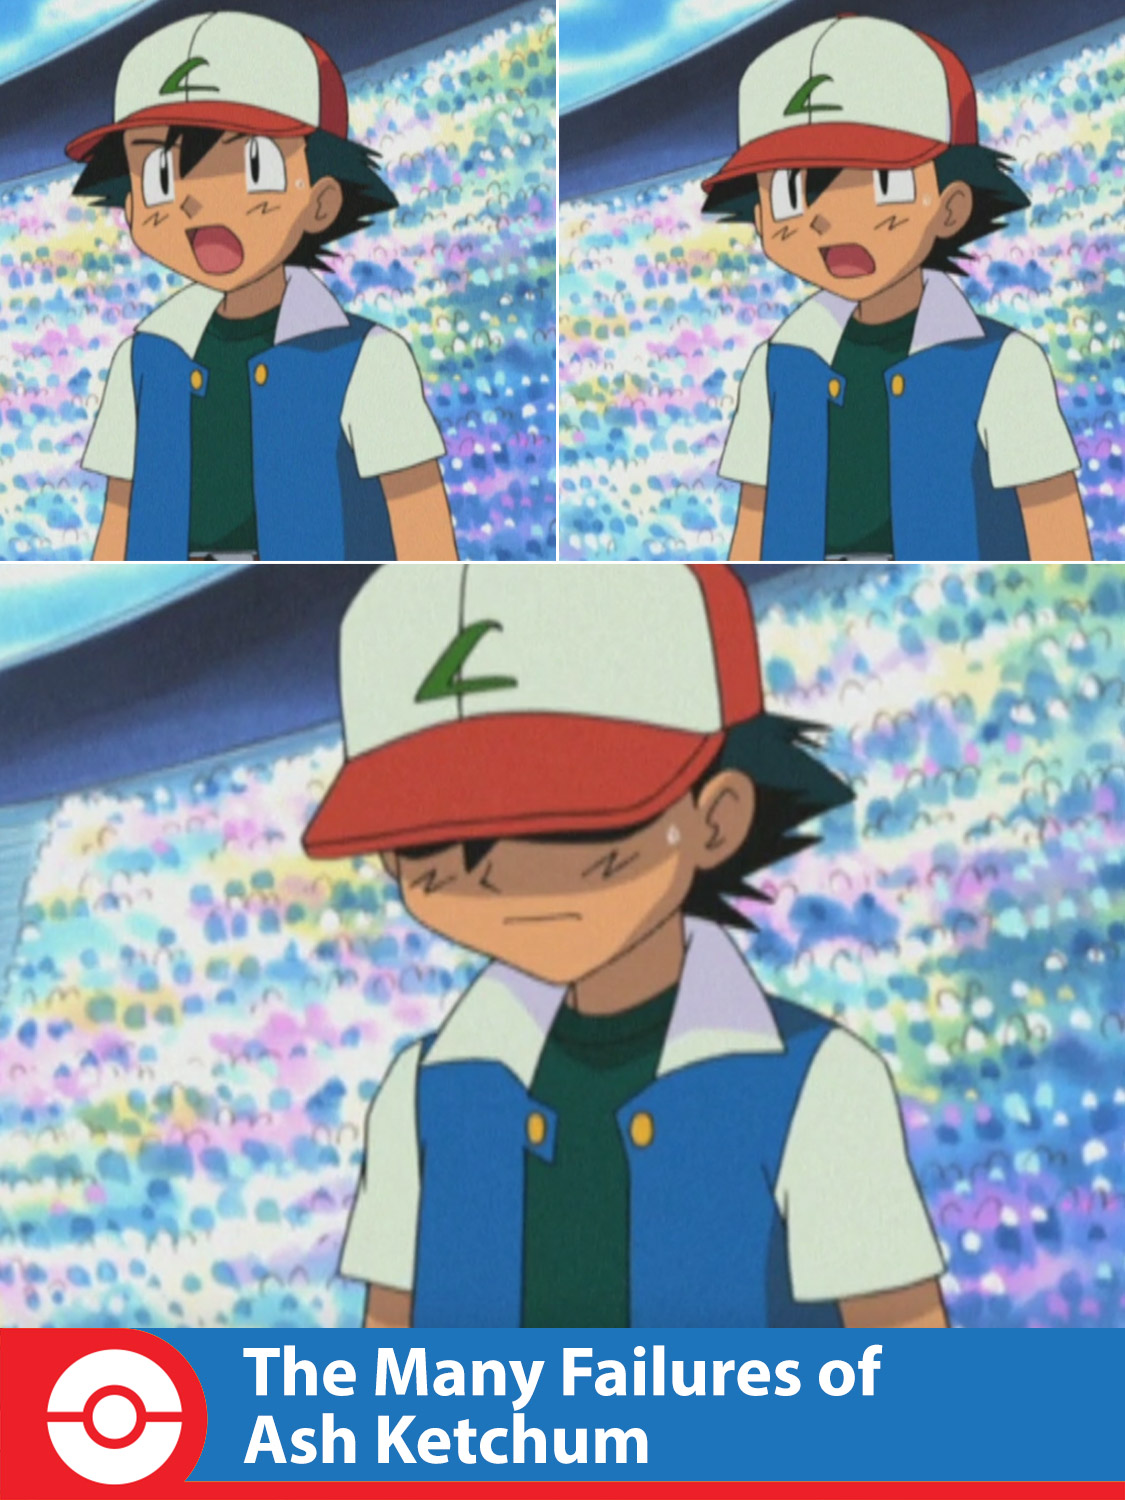 The Many Failures of Ash Ketchum